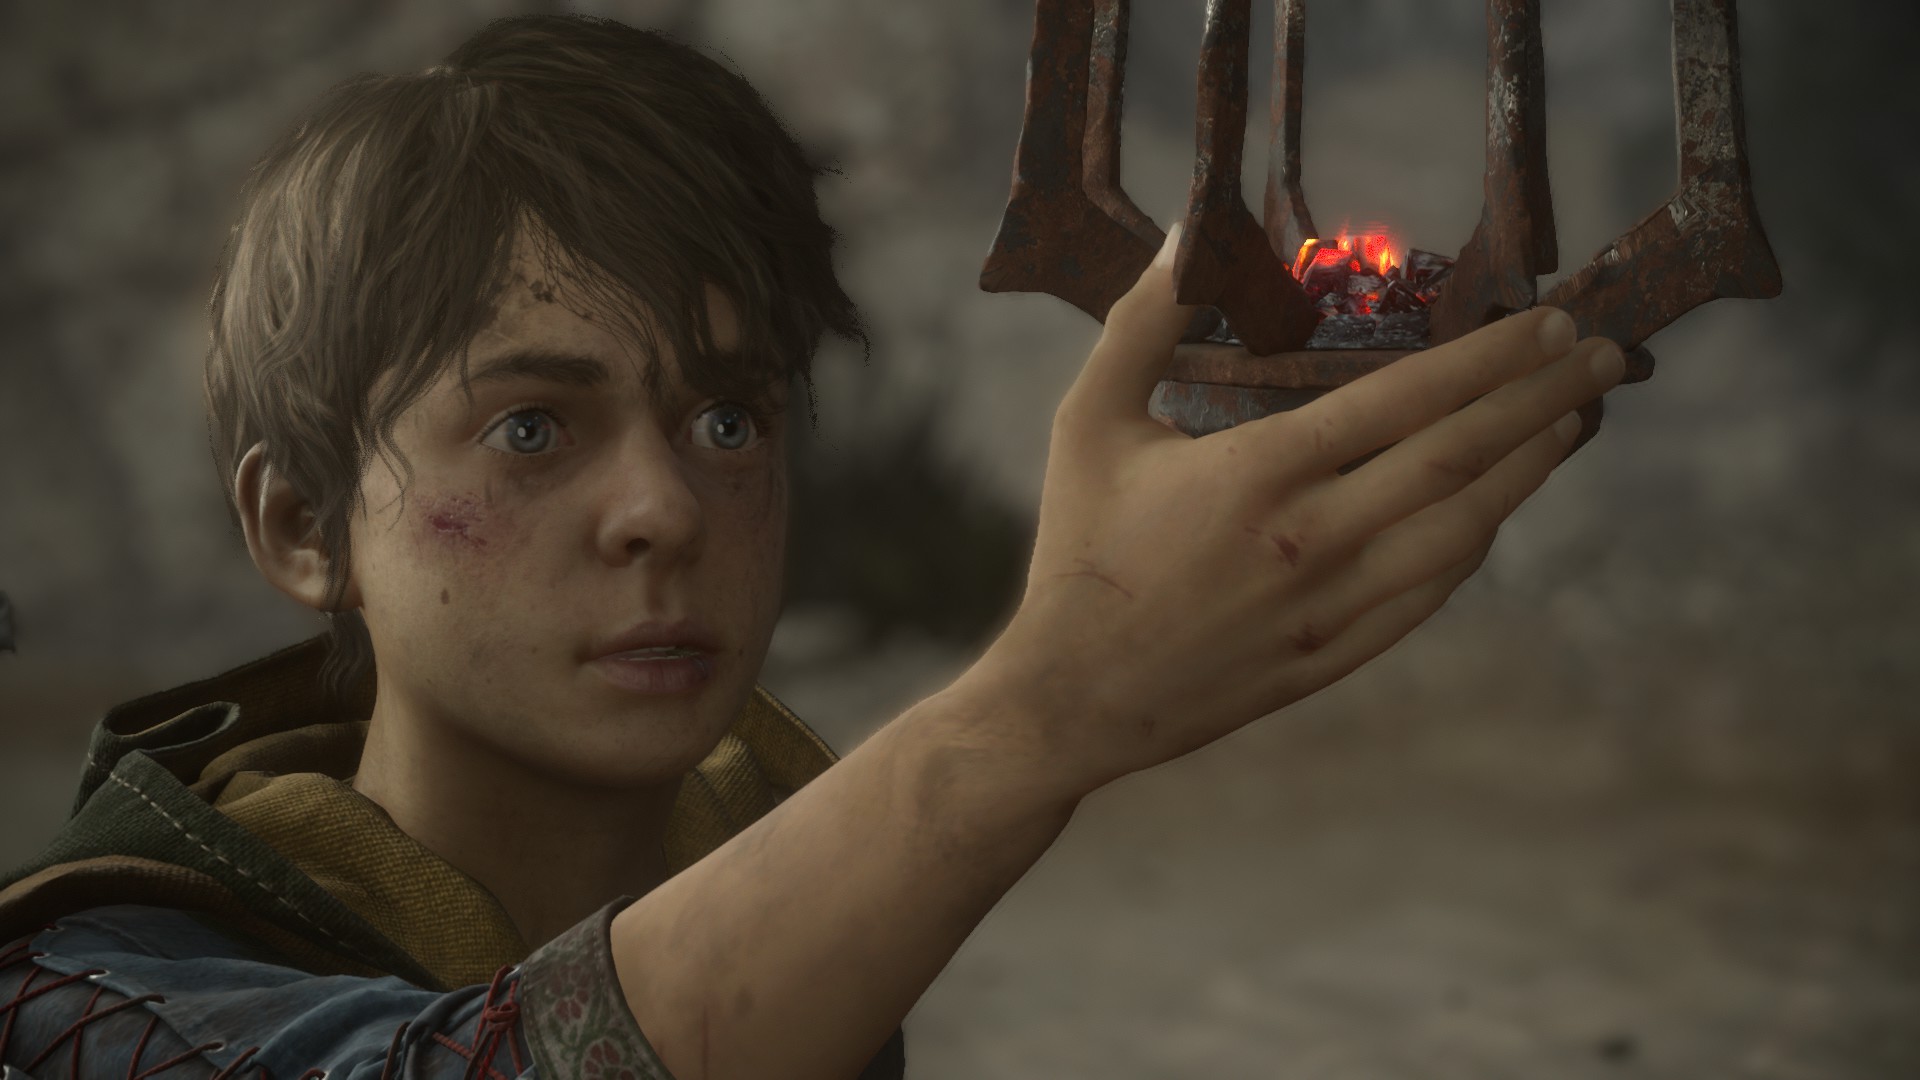 A Plague Tale: Requiem Made Me Laugh at Death and Disease